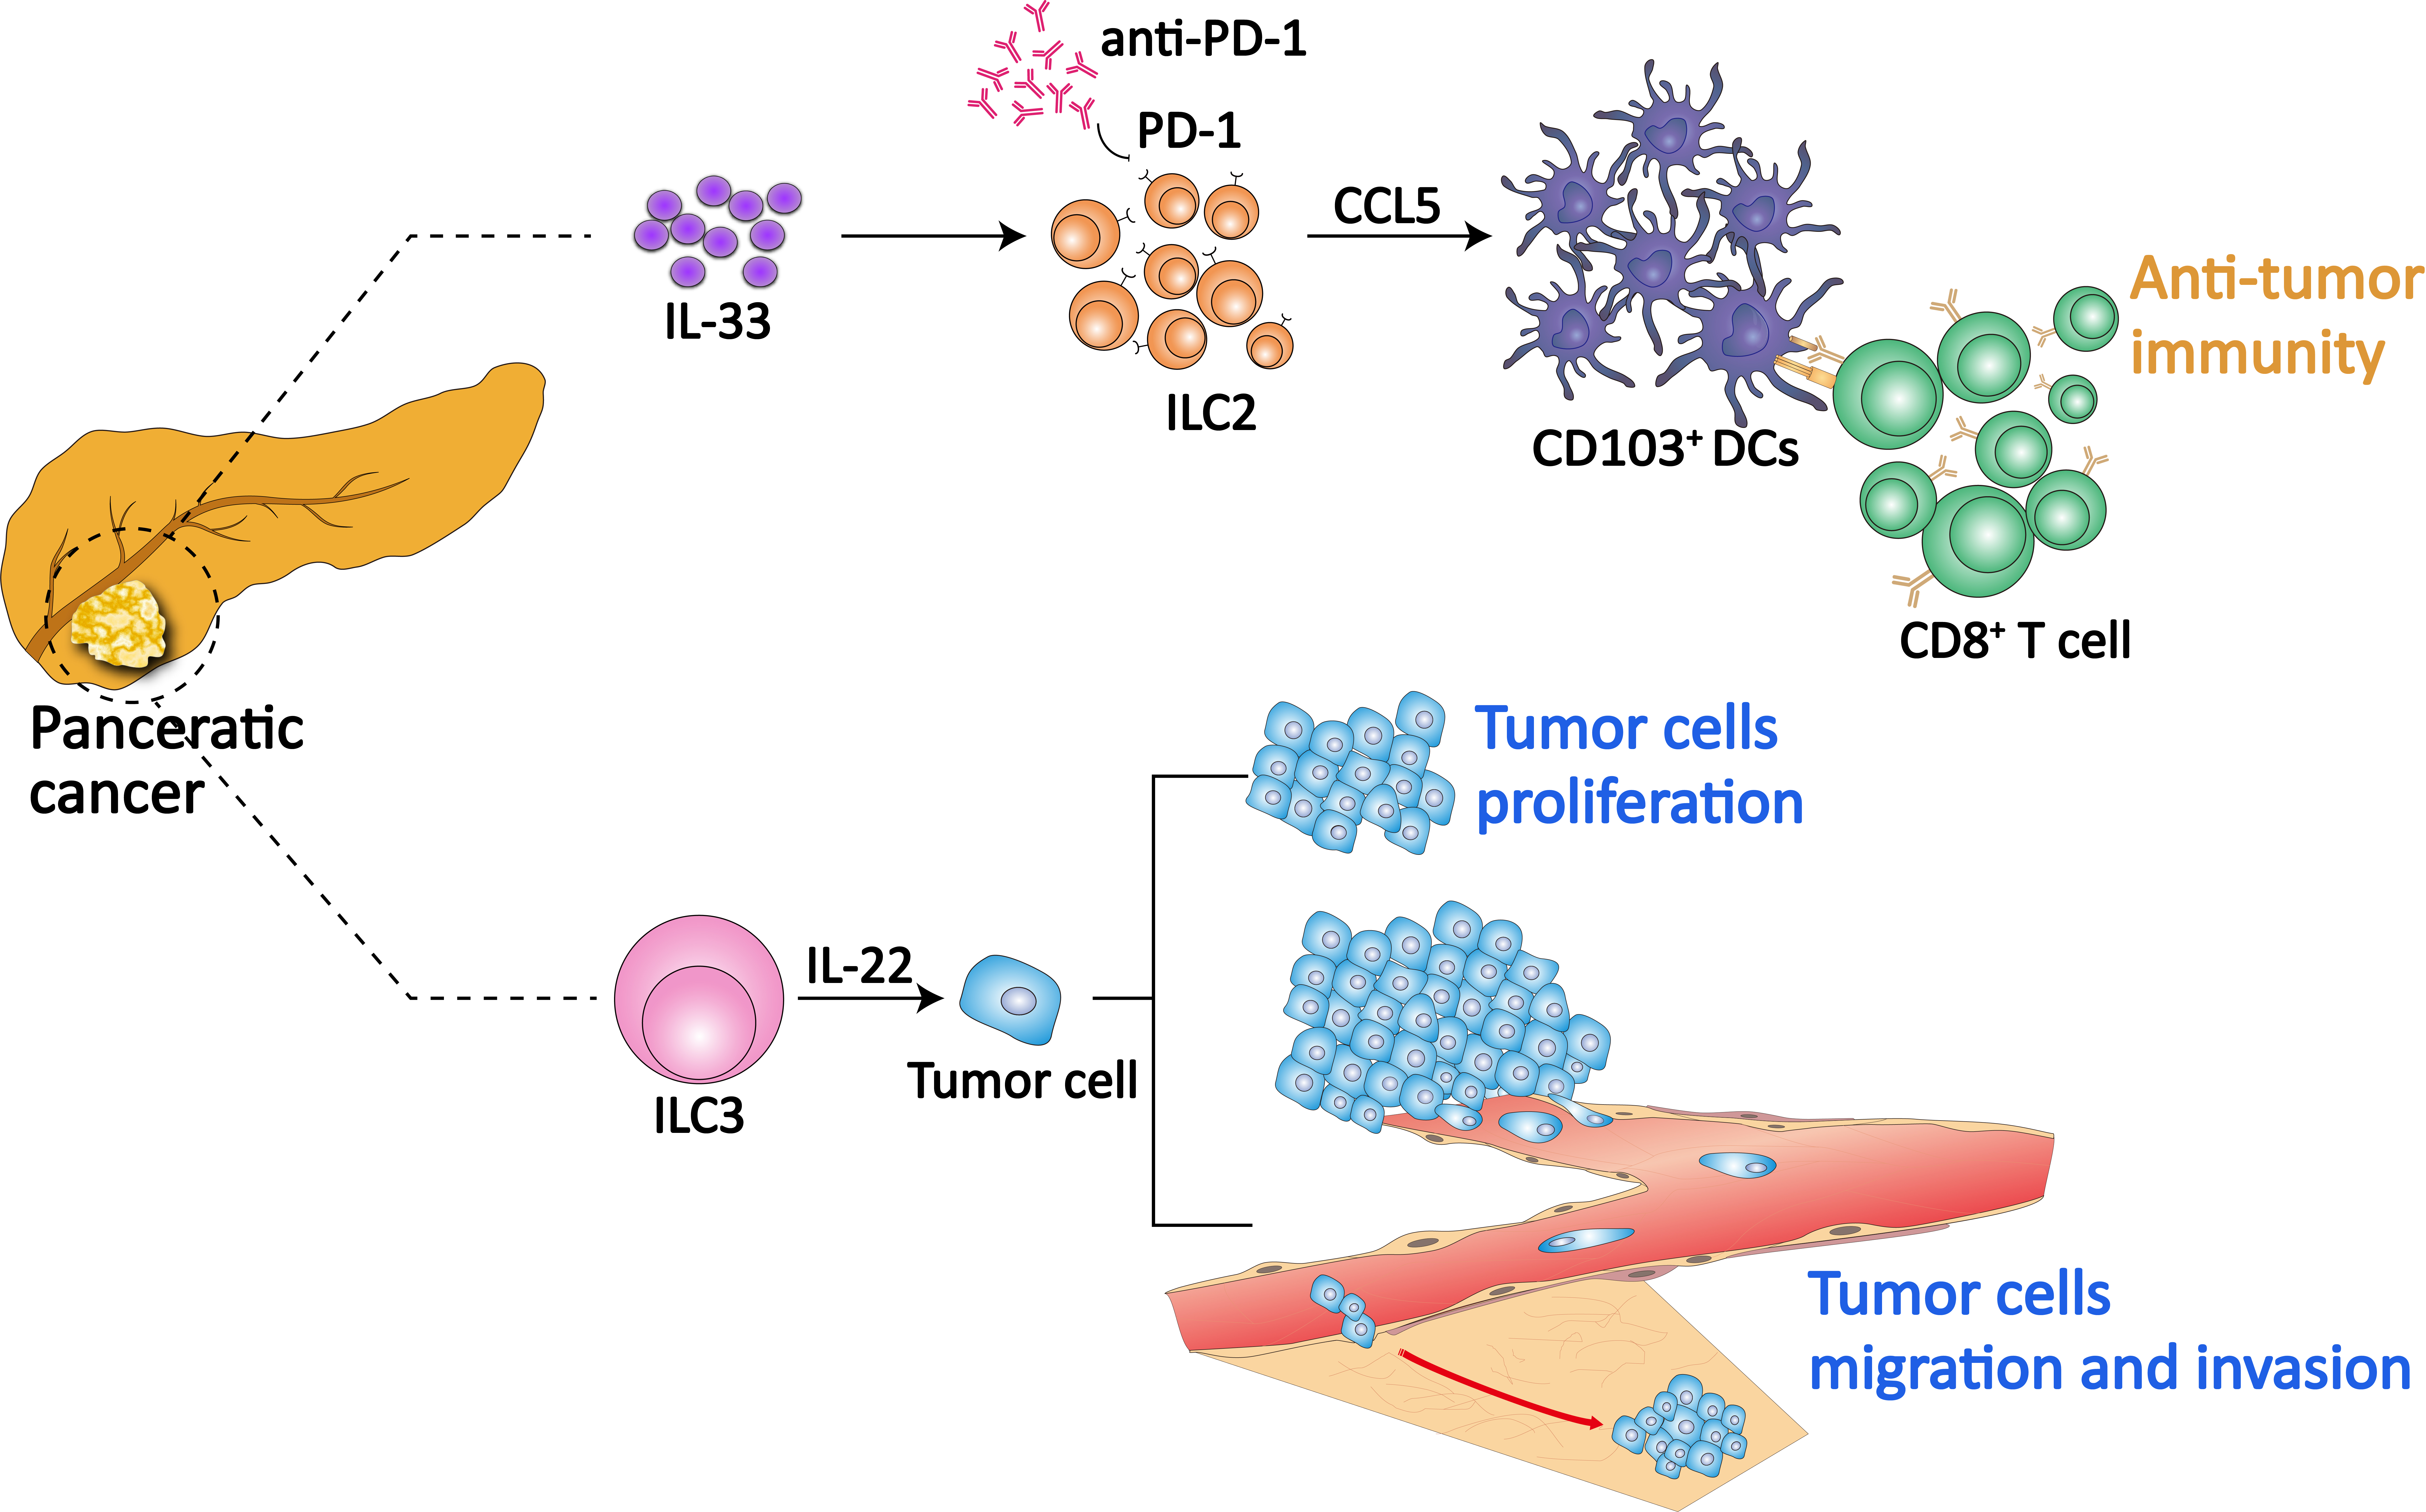 Figure 3. Role of ILCs in pancreatic cancer ILCs may act as a double-edged sword in pancreatic cancer. In PC tissues, the frequencies of ILC2s and ILC3s are both significantly increased. Expanded by IL-33, ILC2s in PC potentially produce chemokine CCL5, which promote the recruitment and accumulation of CD103+ DCs in tumor tissues and further activate antitumor immunity in CD8+T cells. ILC2s express the PD-1, which restrains antitumor immunity. However, the PD-1 inhibition on ILC2 can be relieved by antibody-mediated PD-1 blockade, identifying ILC2s to be a potential, promising and brand-new target for anti-PD-1 immunotherapy. Unlike ILC2s, ILC3s promote the proliferation, metastasis and invasion of PC cells through IL-22/AKT signaling.